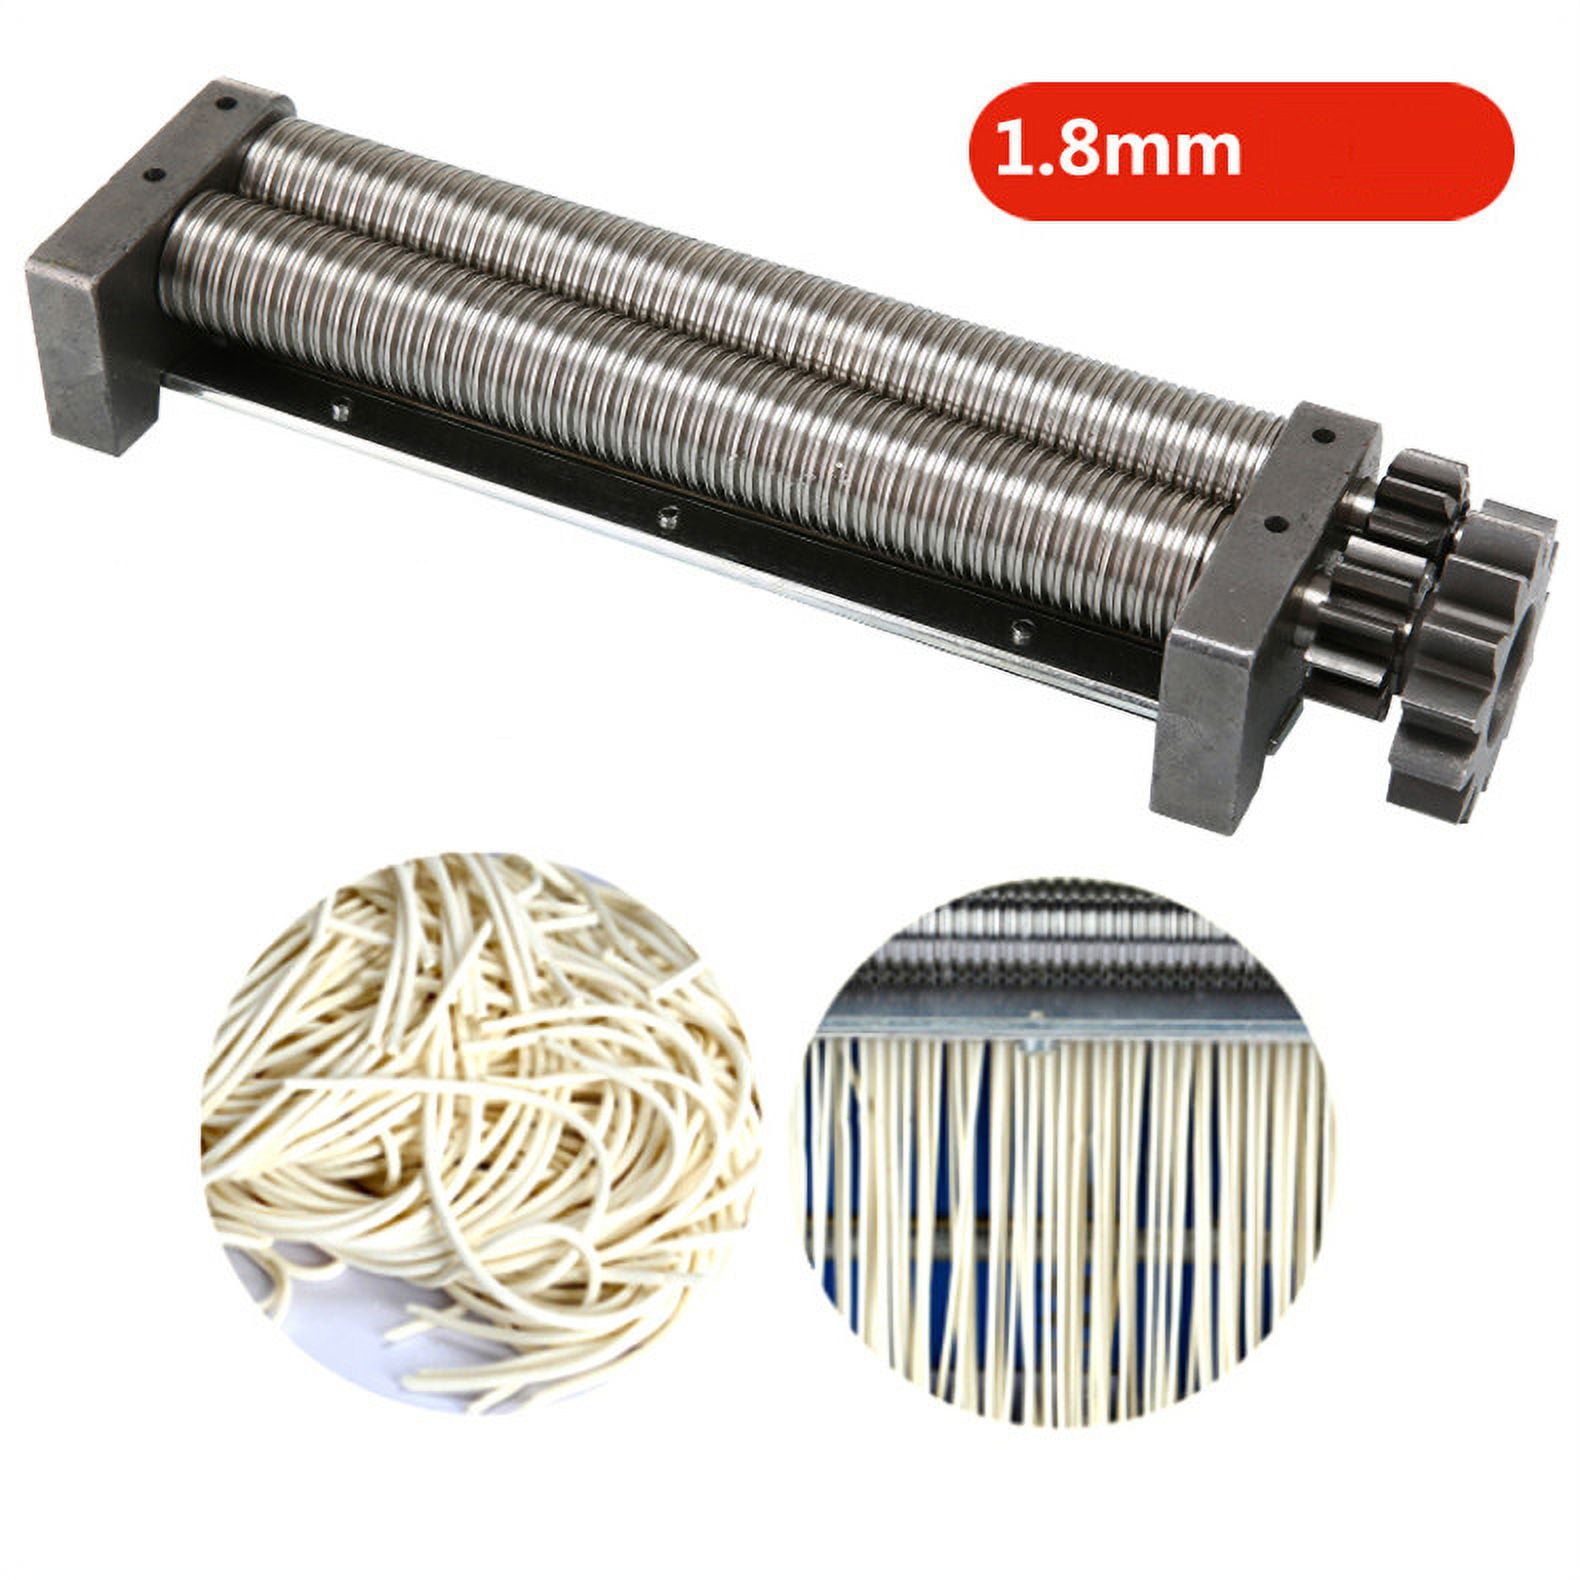 SHANNA Pasta Noodle Maker, 110V 135W Electric Stainless Steel